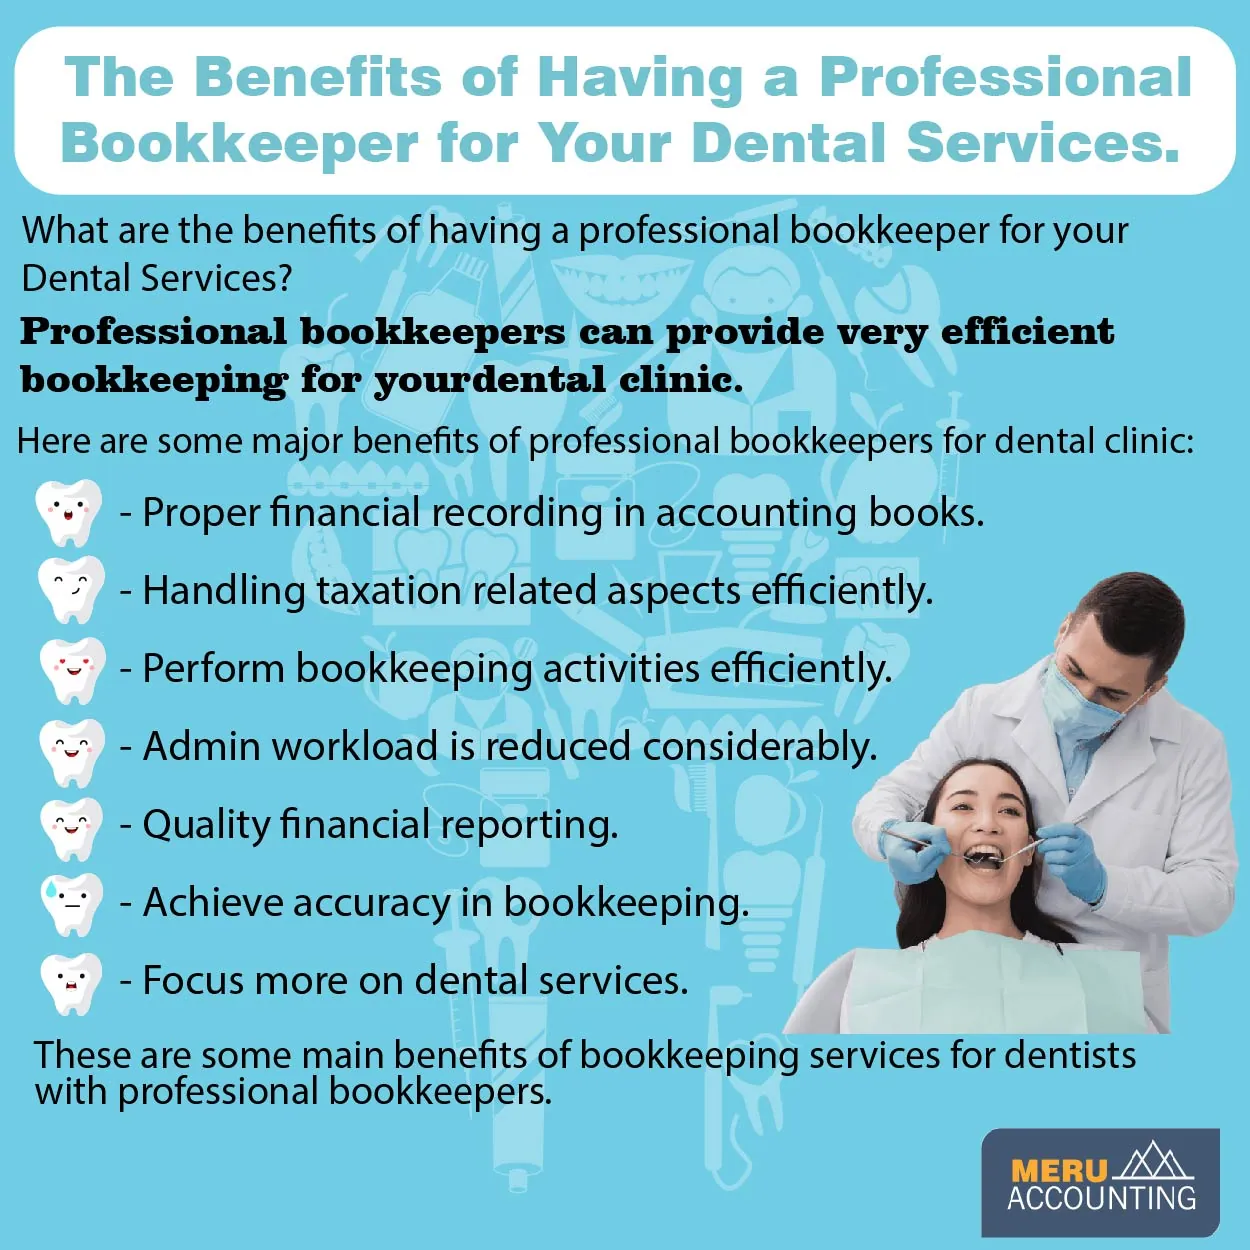 dental bookkeeping services